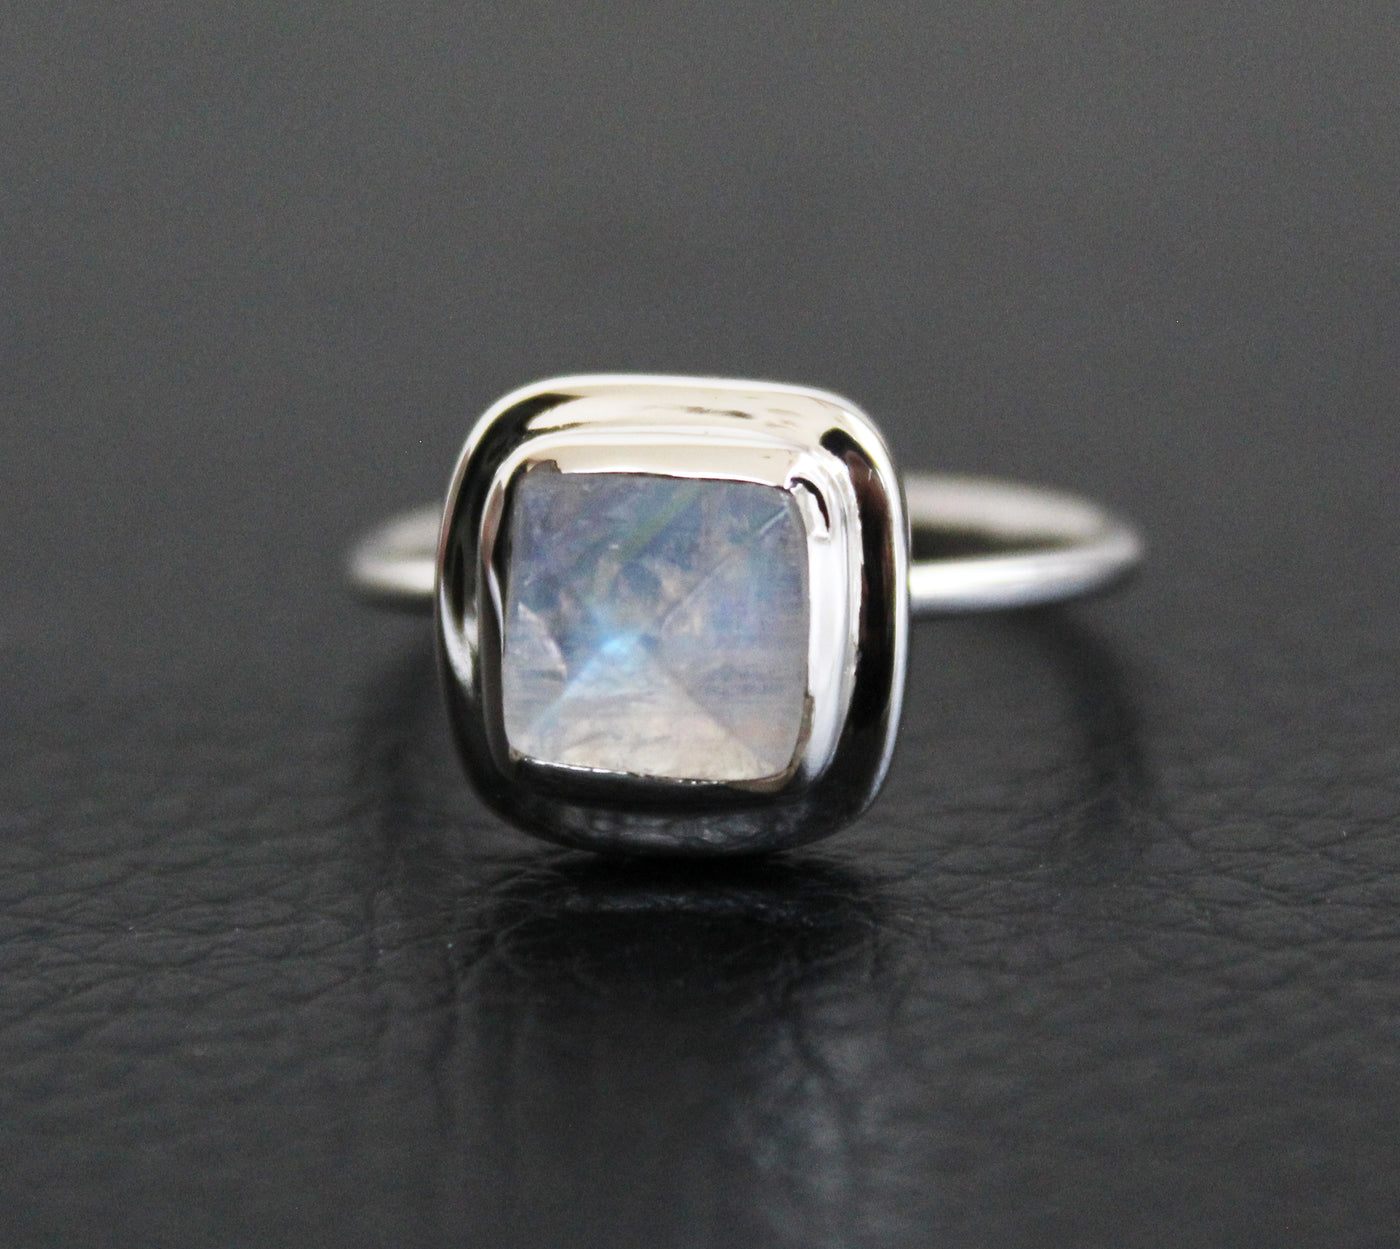 Rainbow Moonstone Ring, AAA Quality Gemstone Ring 925, Gift For Her, Sterling Silver Ring, Simple Gemstone Ring